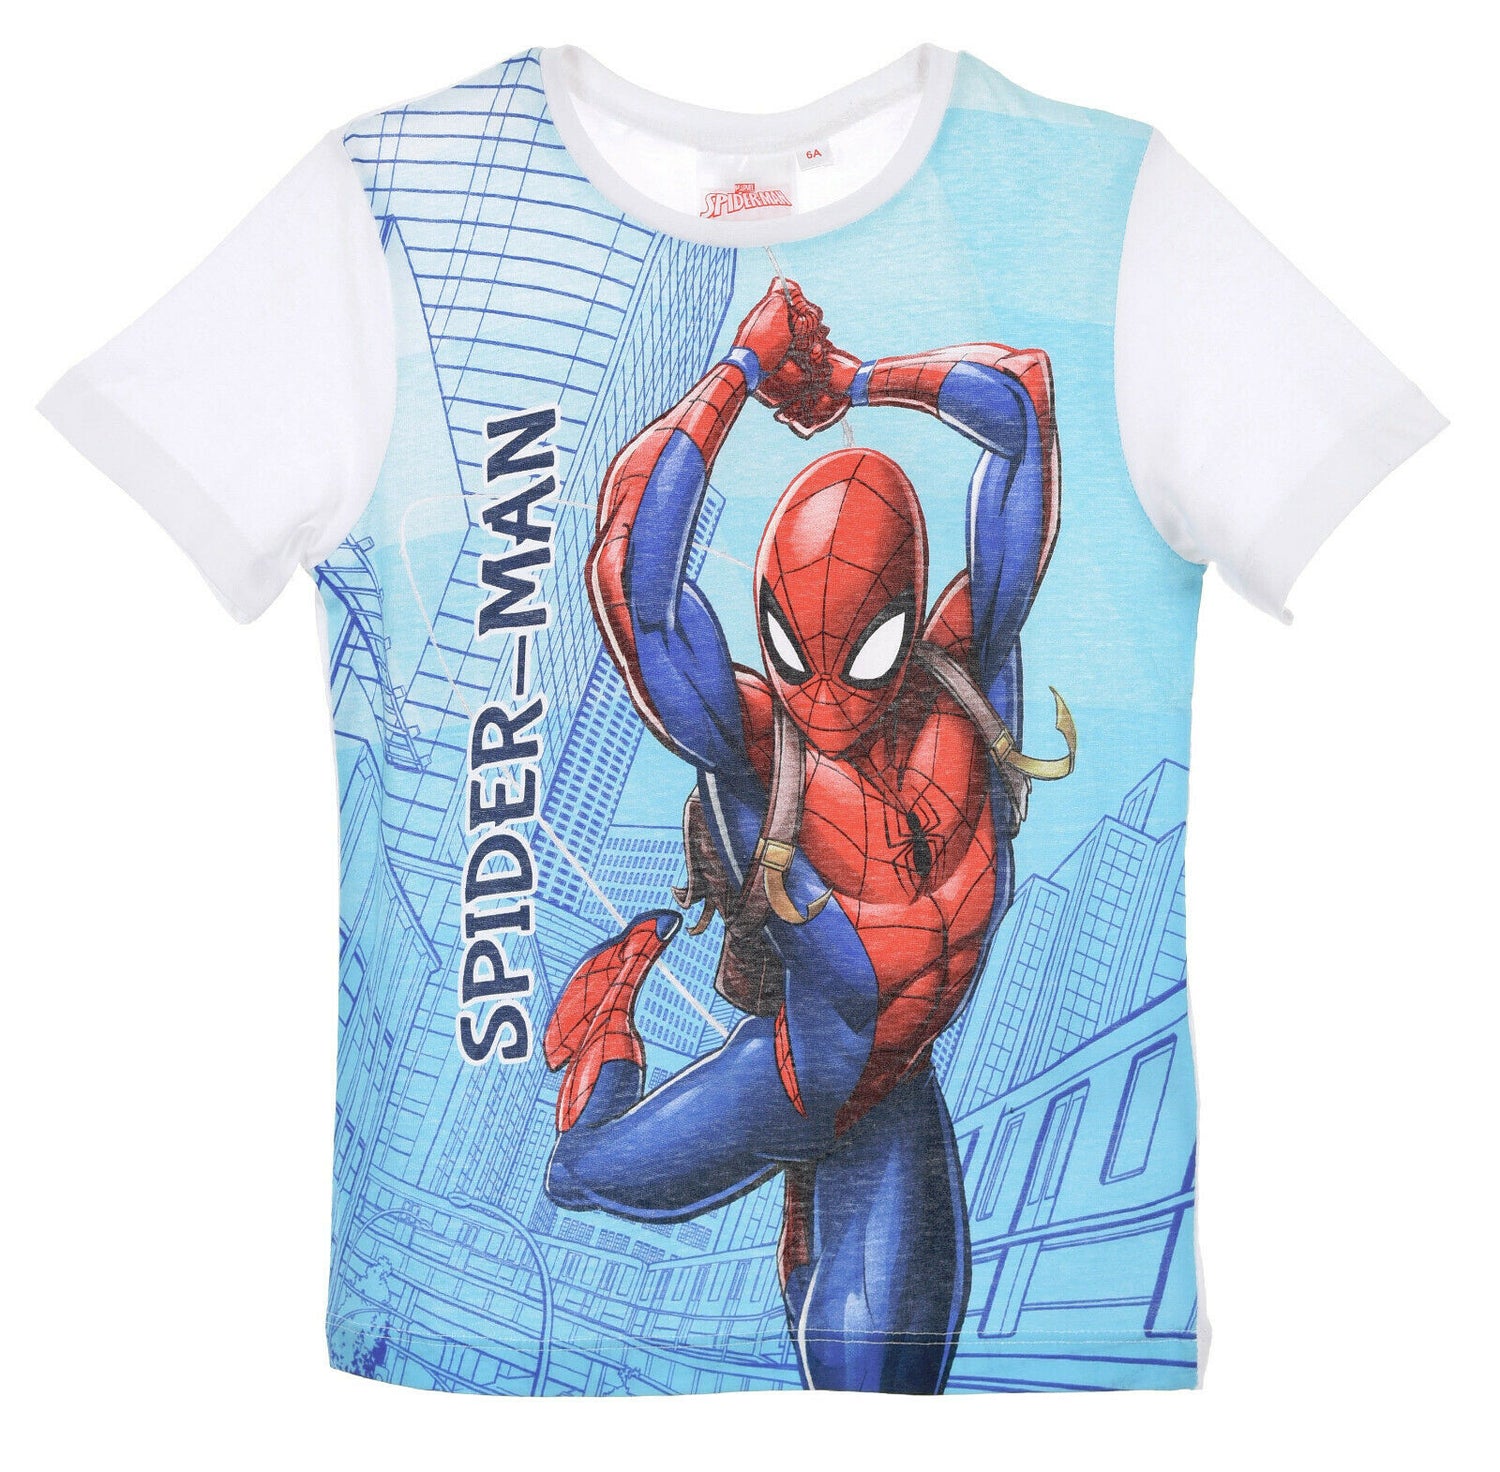 Boys Spiderman White & Light Blue Short Sleeve T-Shirt. Ages 3 To 8, They Are Perfect For A Gift Or Treat. They Are Official Merchandise.